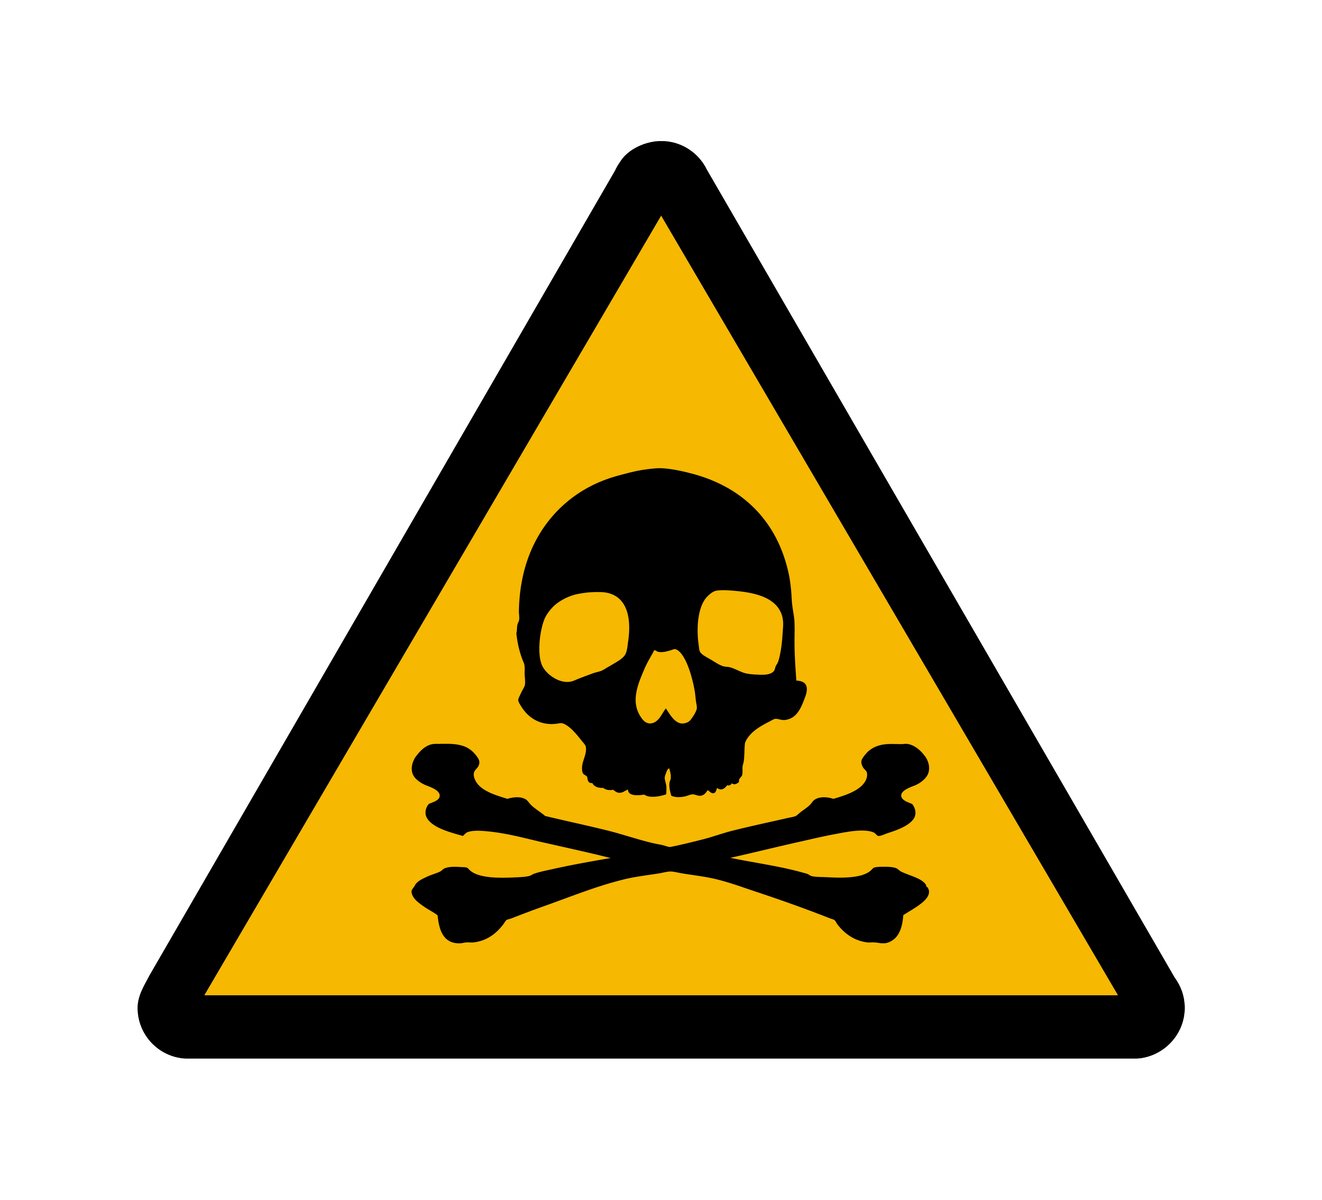 a skull and cross bones sign in yellow